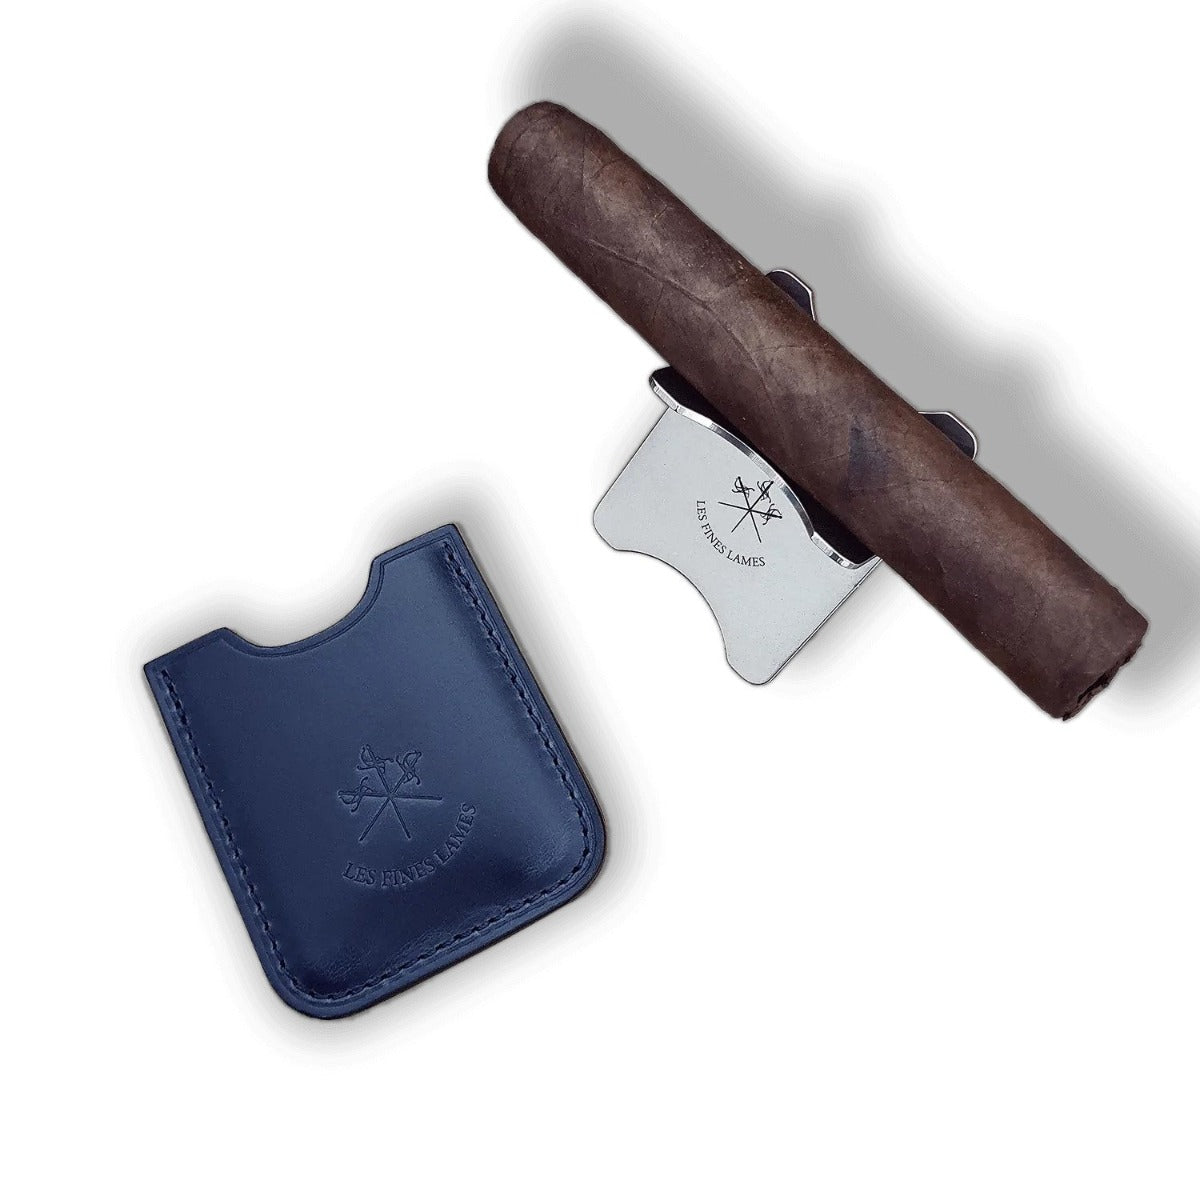 A Kirby Allison Petrol Blue Cigar Stand featuring a calfskin leather case for holding a Les Fines Lames cigar.